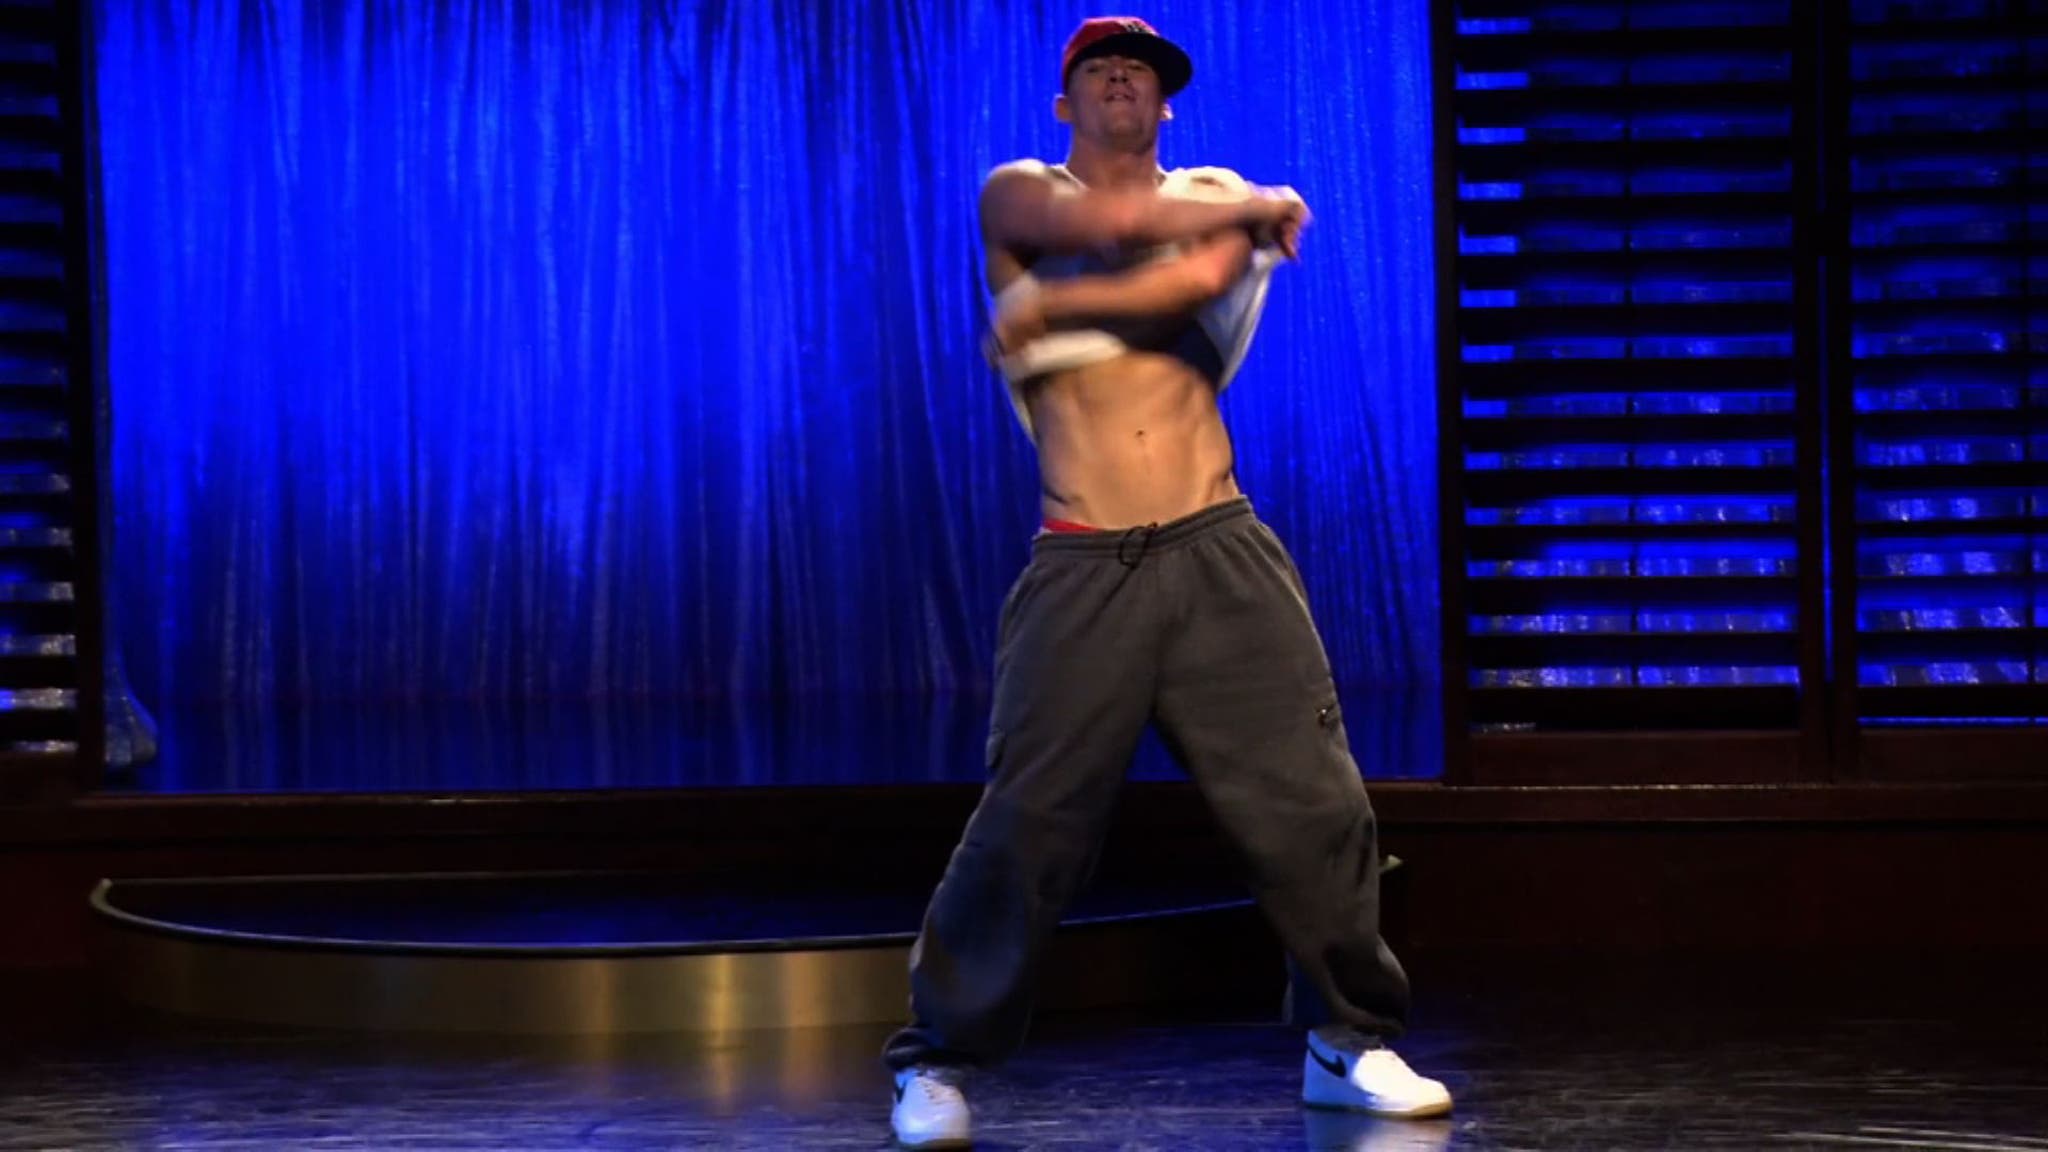 "Magic Mike": See Sexy Stripteases In Behind-the-Scenes Clips! 